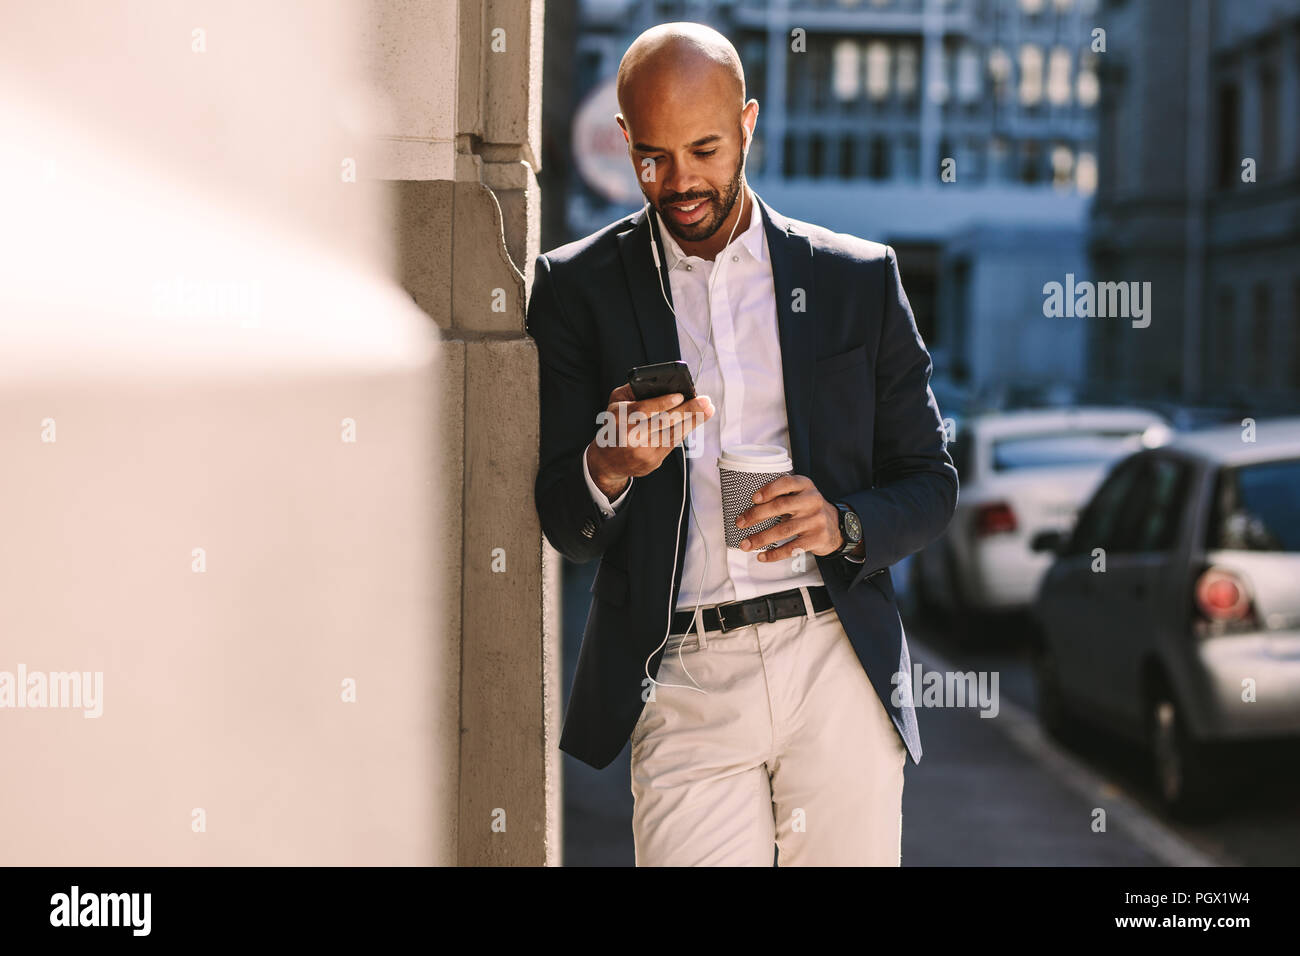 Handsome businessman leaning on a wall while standing outdoors and using smartphone. Man in suit wearing earphones looking at his mobile phone. Stock Photo